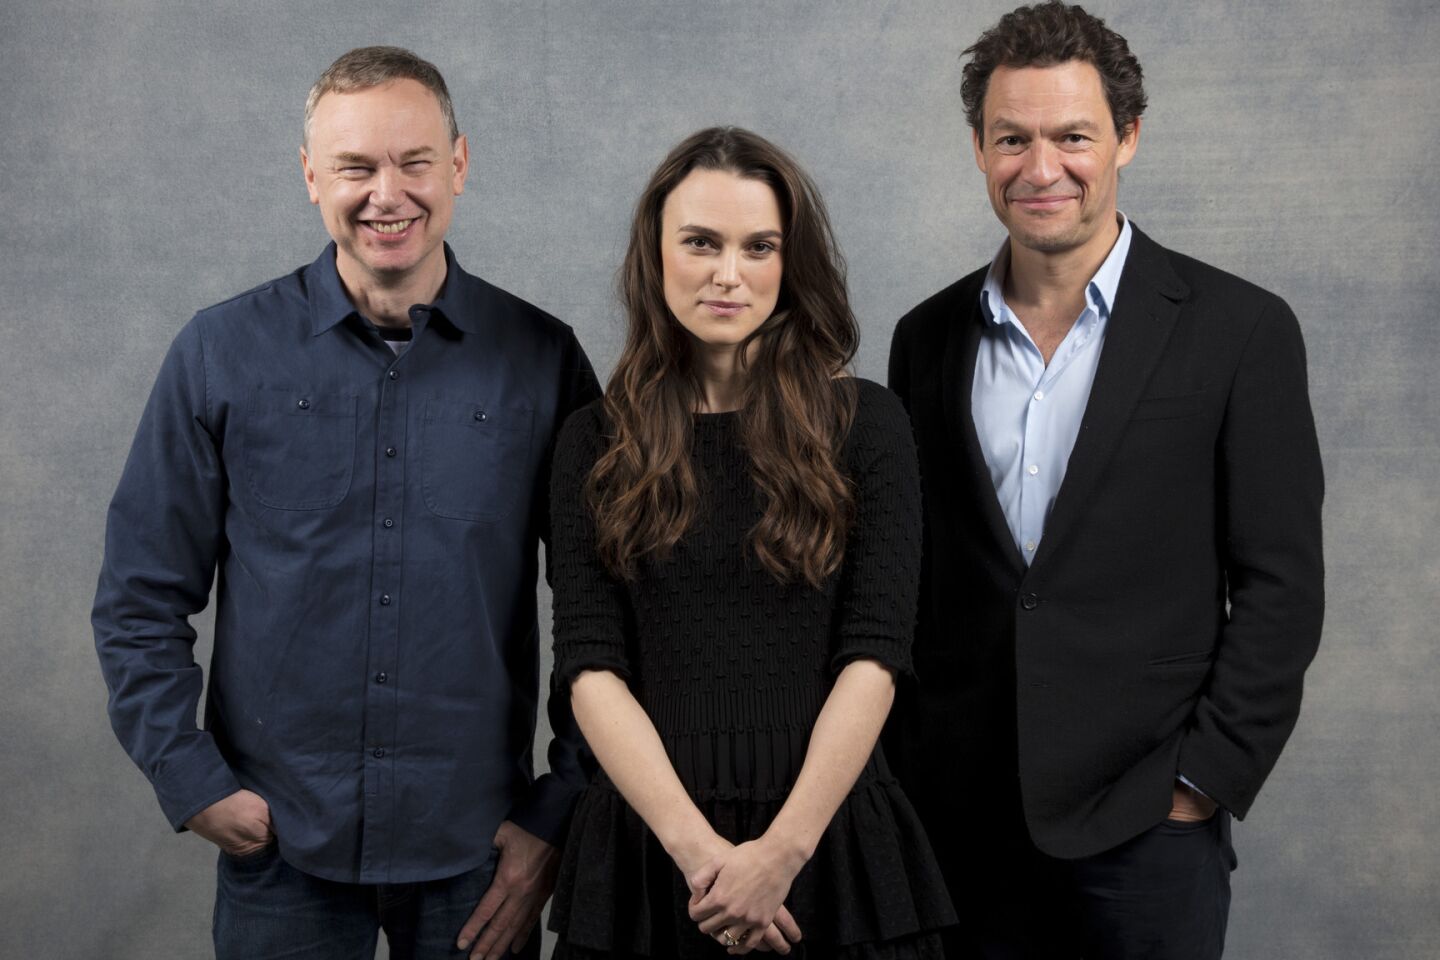 Director Wash Westmoreland, actress Keira Knightley, and actor Dominic West, from the film, "Collette," photographed in the L.A. Times Studio at Chase Sapphire on Main, during the Sundance Film Festival in Park City, Utah, Jan. 21, 2018.